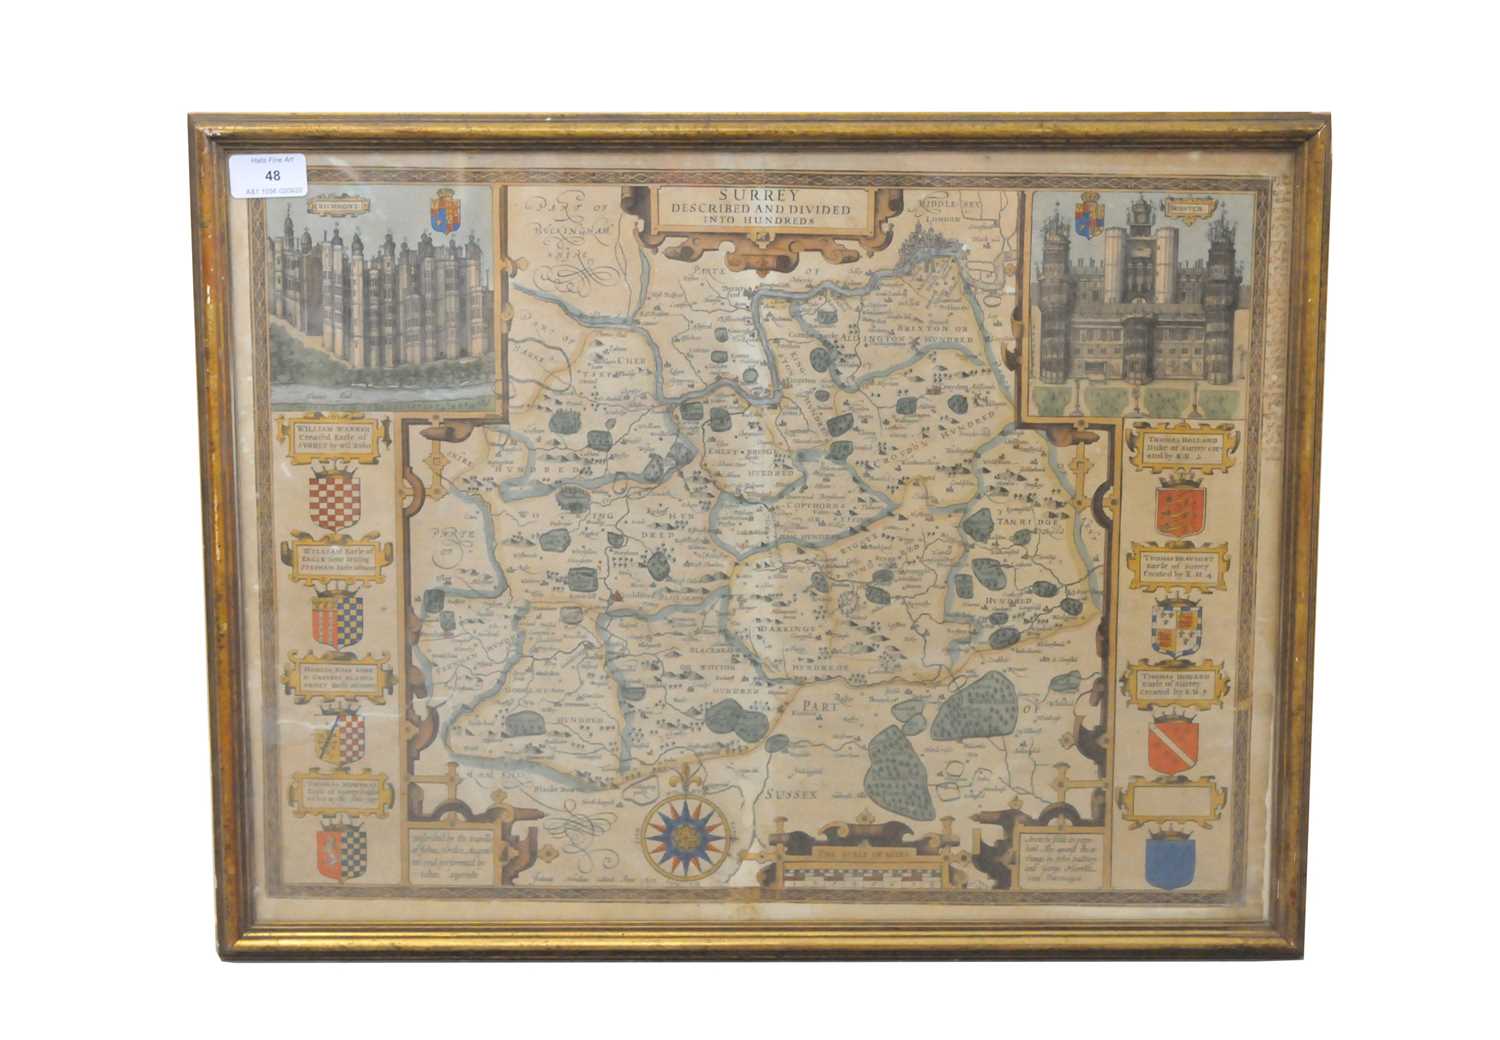 MAP. HONDIUS, Jodocus, Surrey. Sudbury and Humble 1610. 380 x 510mm, hand coloured. Framed and